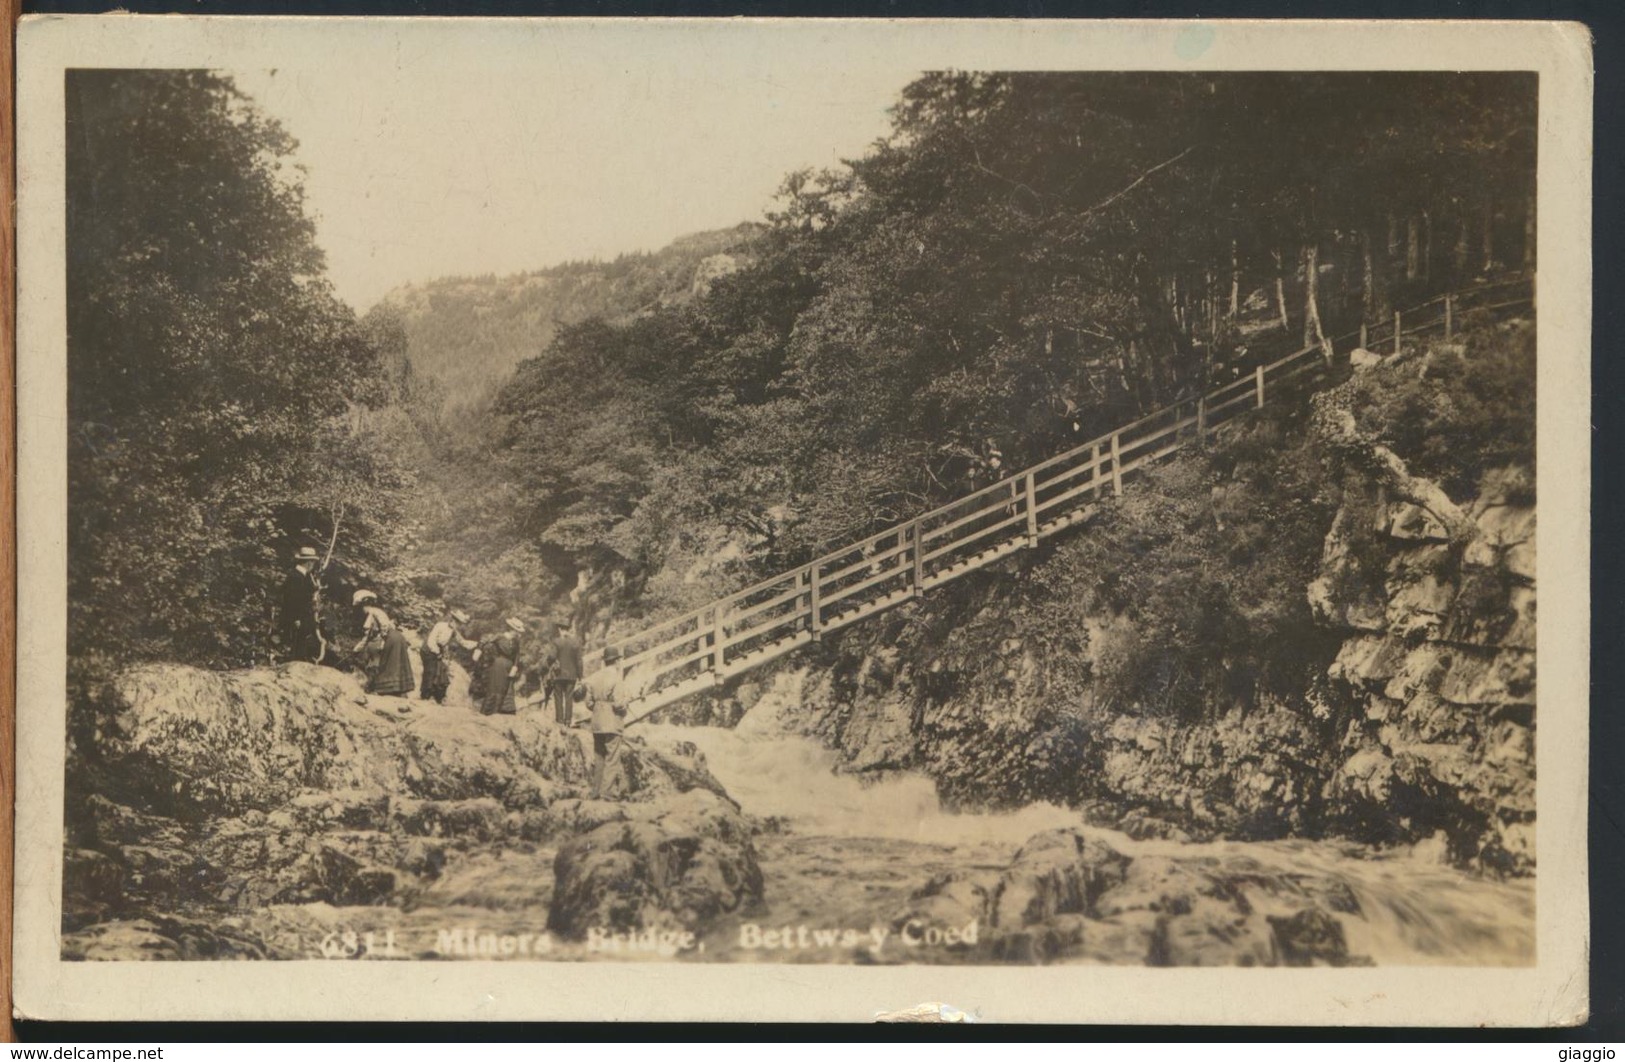 °°° 11825 - WALES - MINERS BRIDGE , BETTWS Y COED - 1925 With Stamps °°° - Caernarvonshire